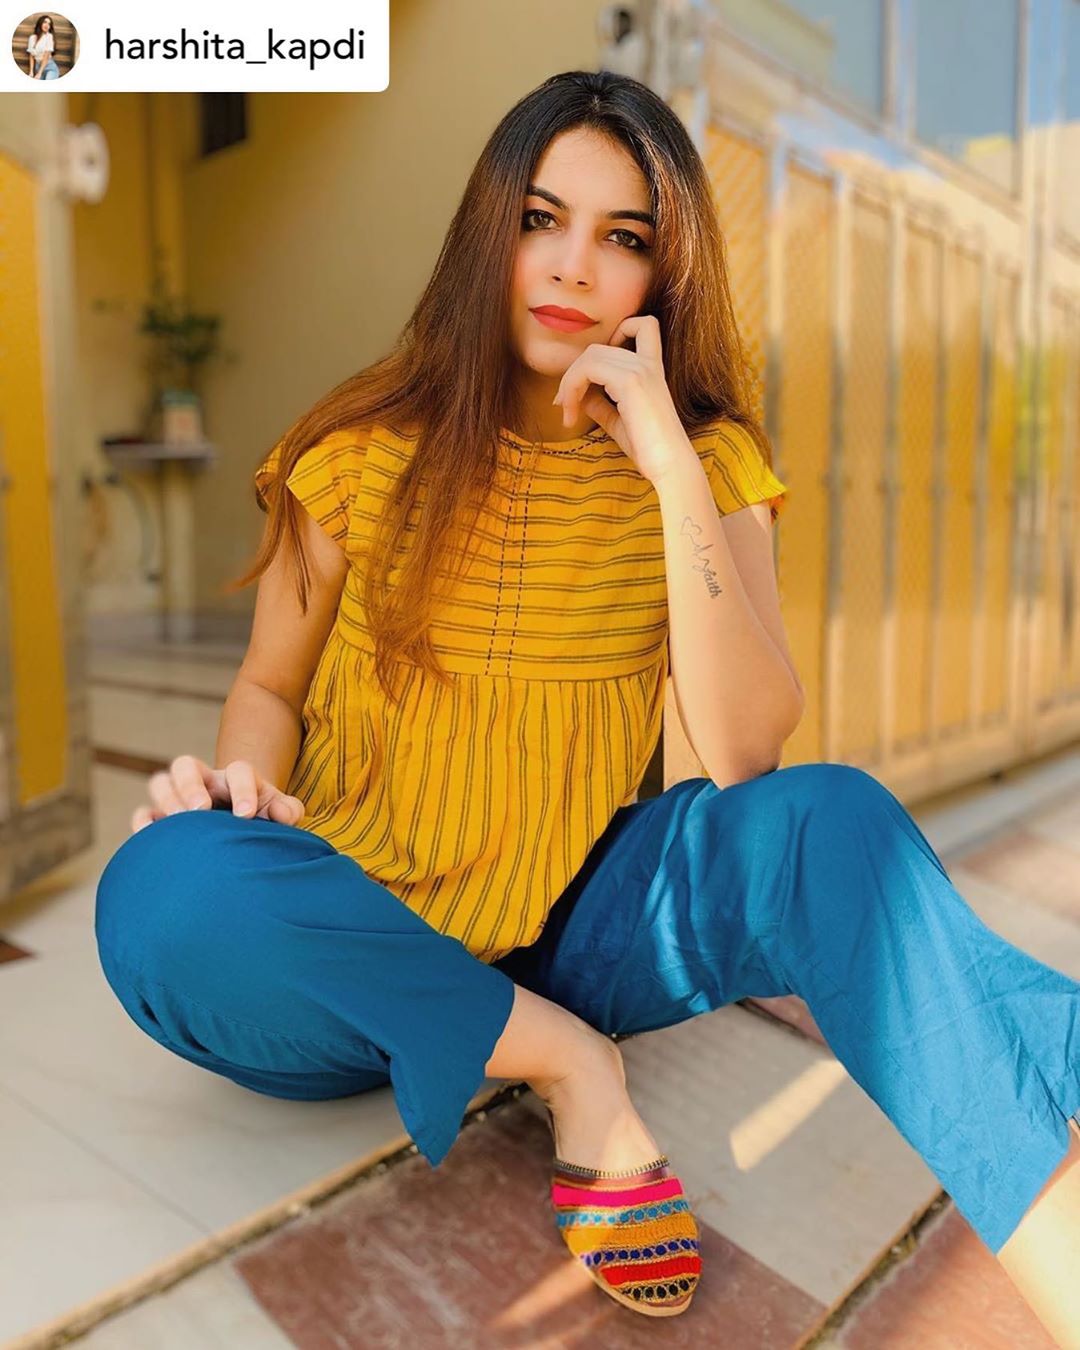 AJIO. com - @harshita_kapdi makes comfort a sunny statement with this AJIO.com top. “When you are comfortable in a garment and can pull it off without inhibition, that can bring you great confidence,”...